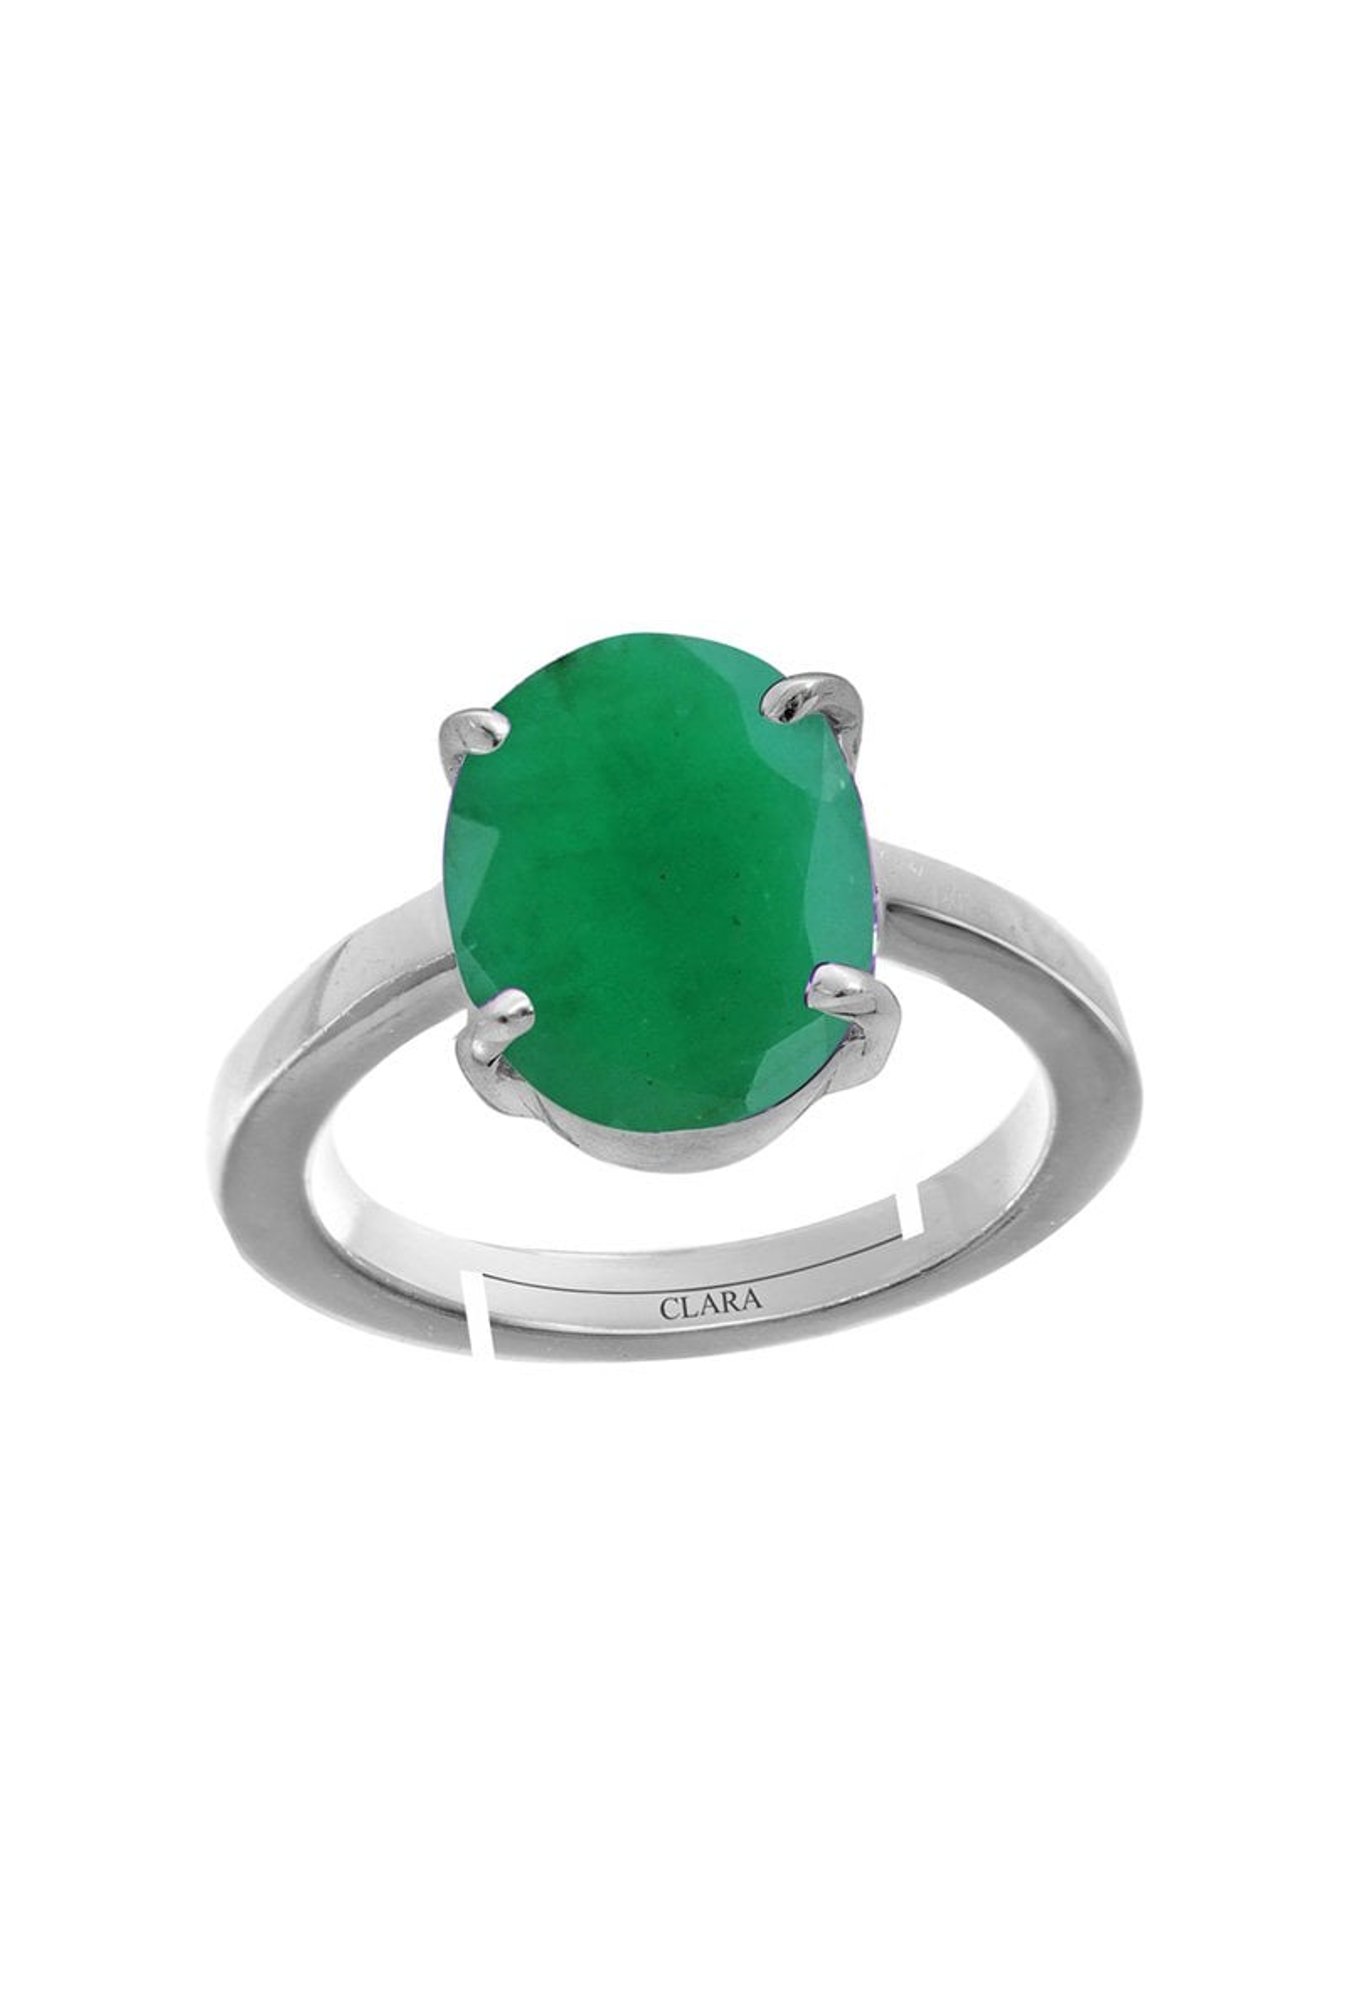 Amazing Quality Emerald Silver Ring 12 mm x 10 mm